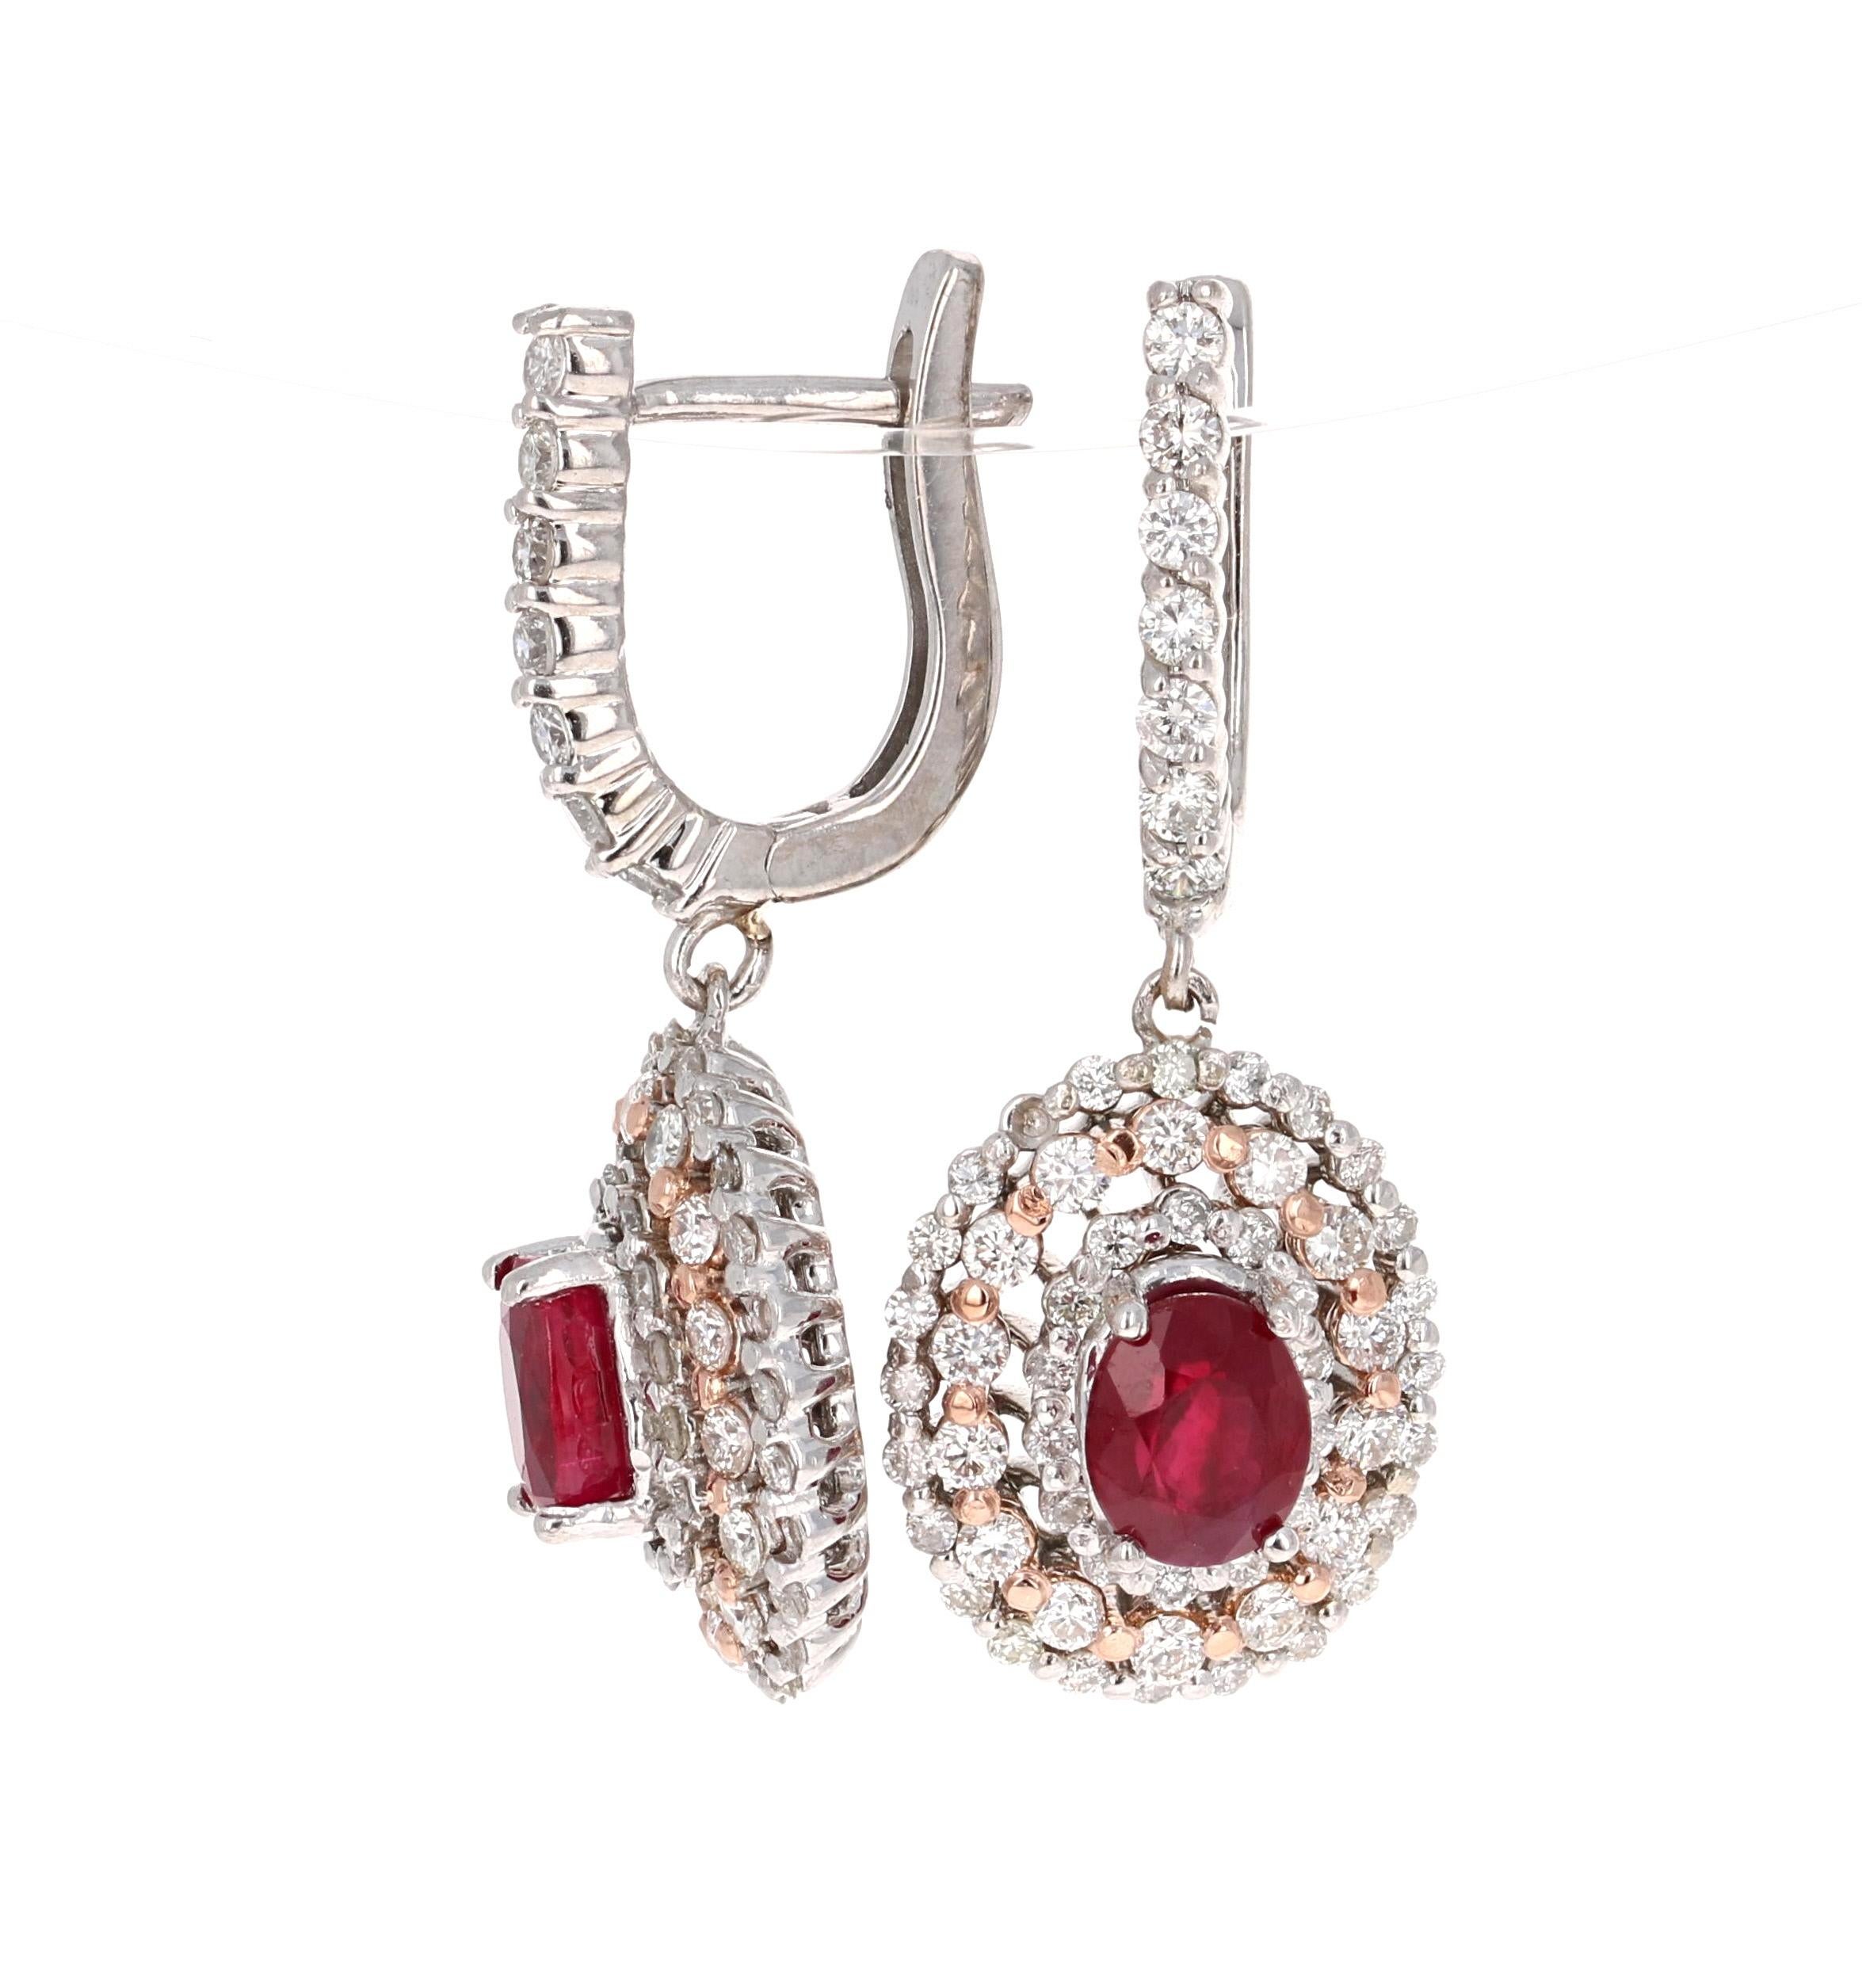 These earrings have 2 Natural Oval Cut Rubies that weigh 2.05 Carats. They are surrounded by 134 Round Cut Diamonds that weigh 1.50 Carats. (Clarity: VS2, Color: F).  The total carat weight of the Earrings is 3.55 Carats.

They are made in 14 Karat